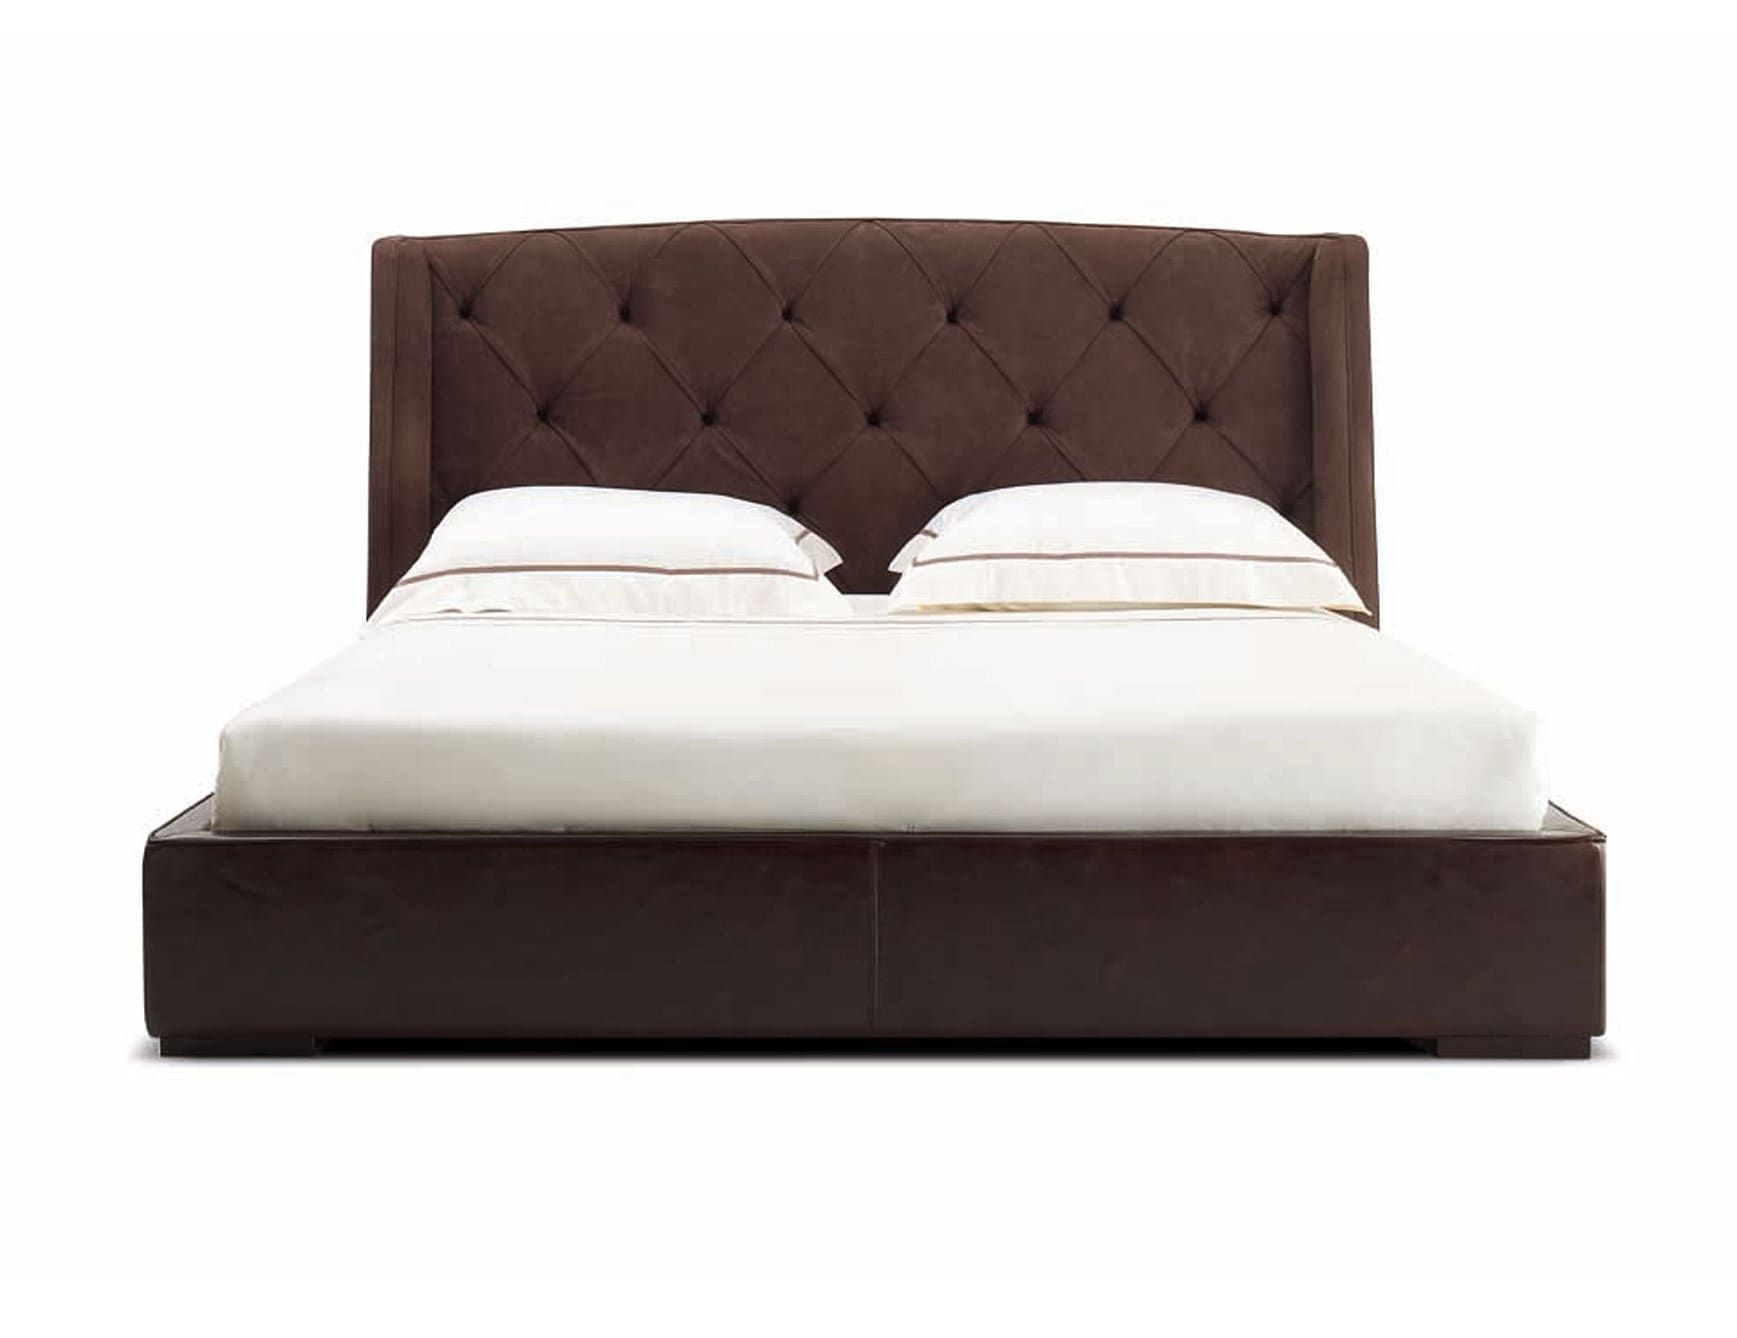 Damien modern Italian bed with brown fabric